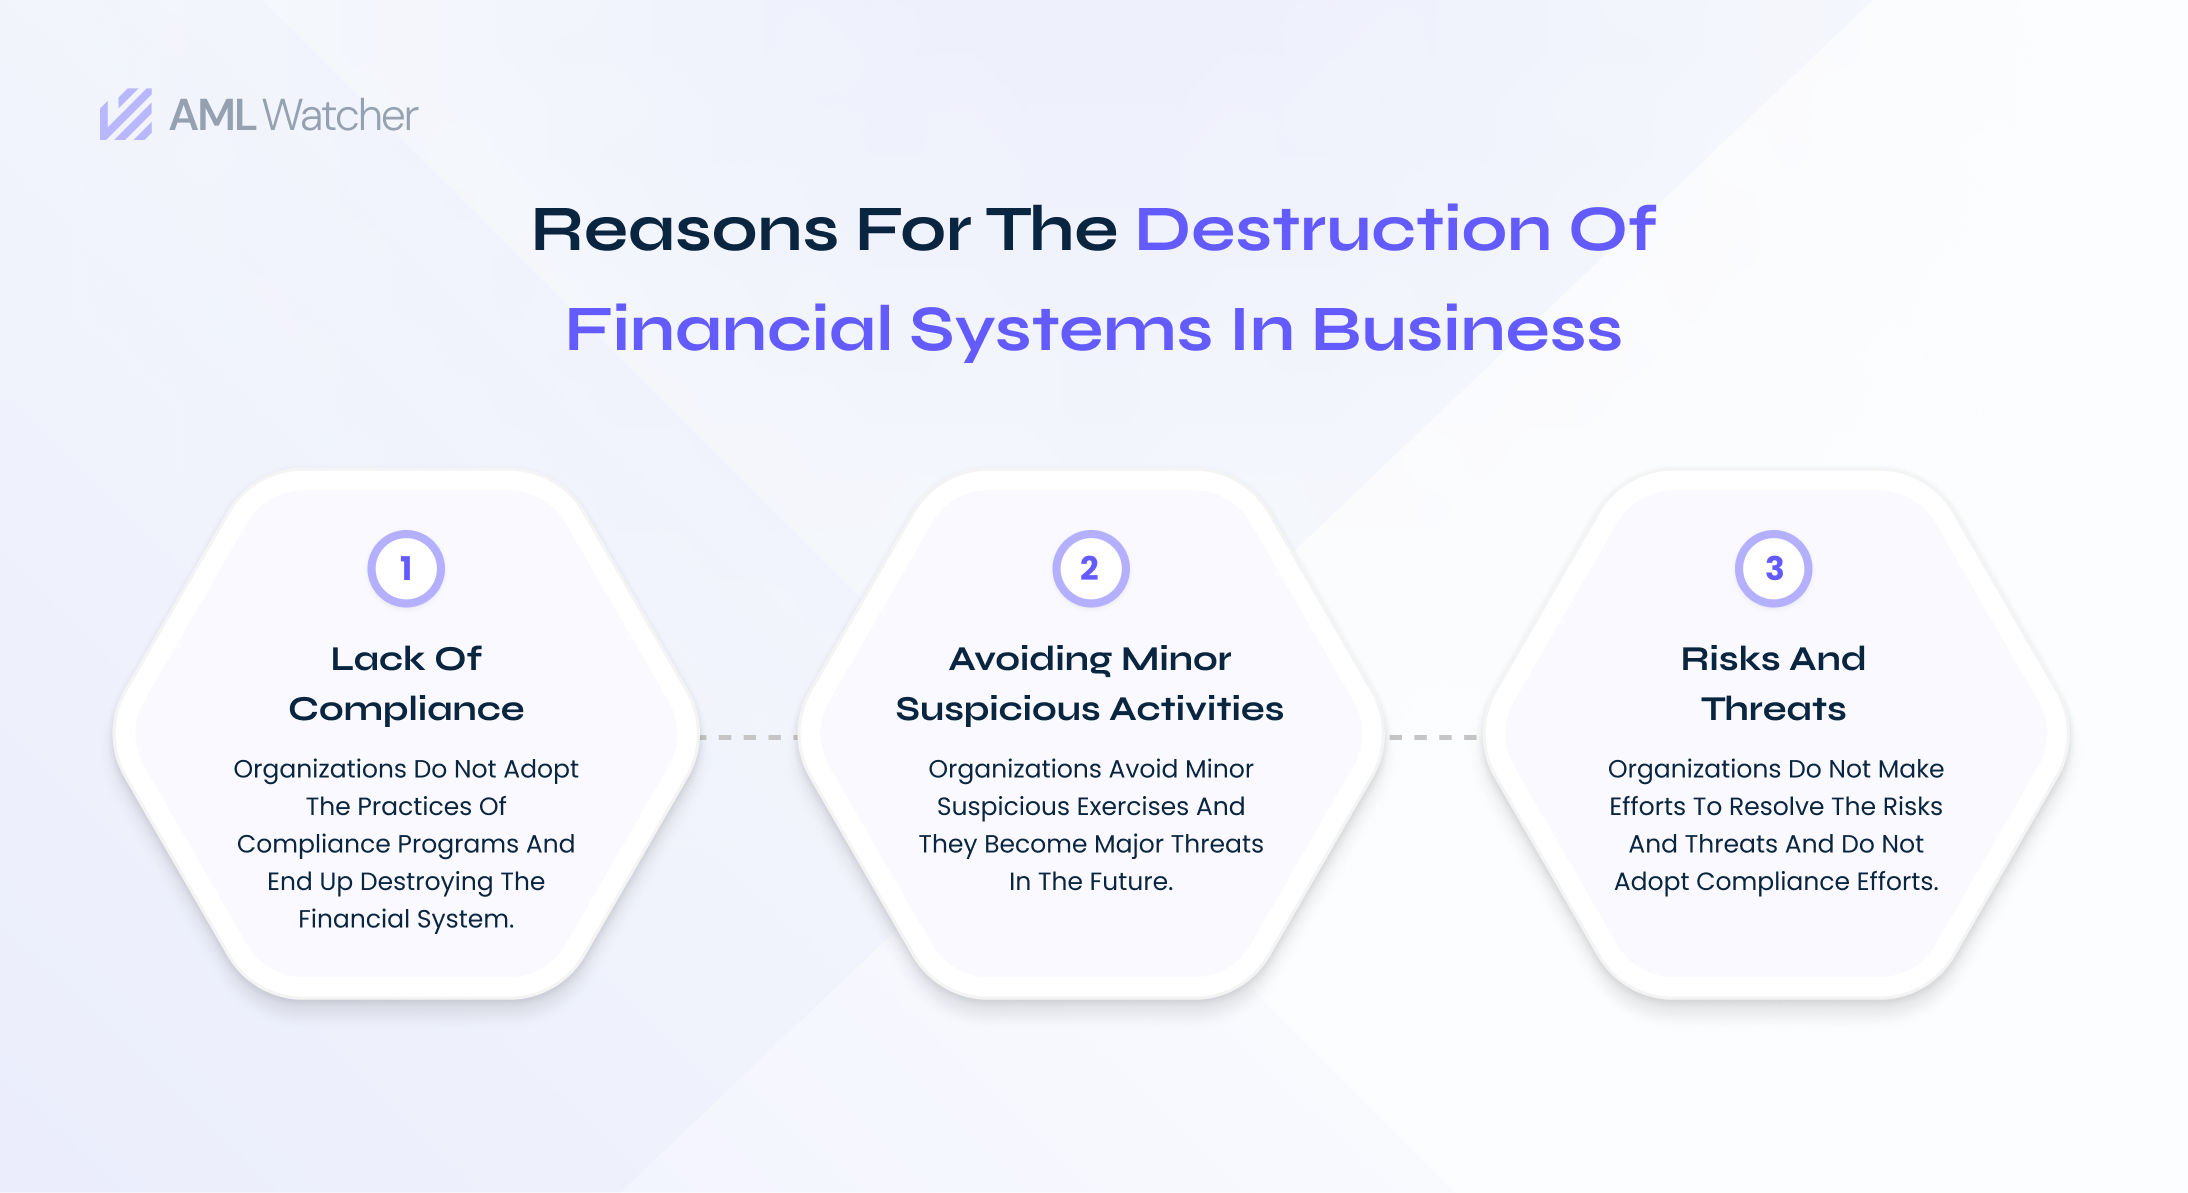 There are many reasons that play a role in destroying the financial departments of organizations. 